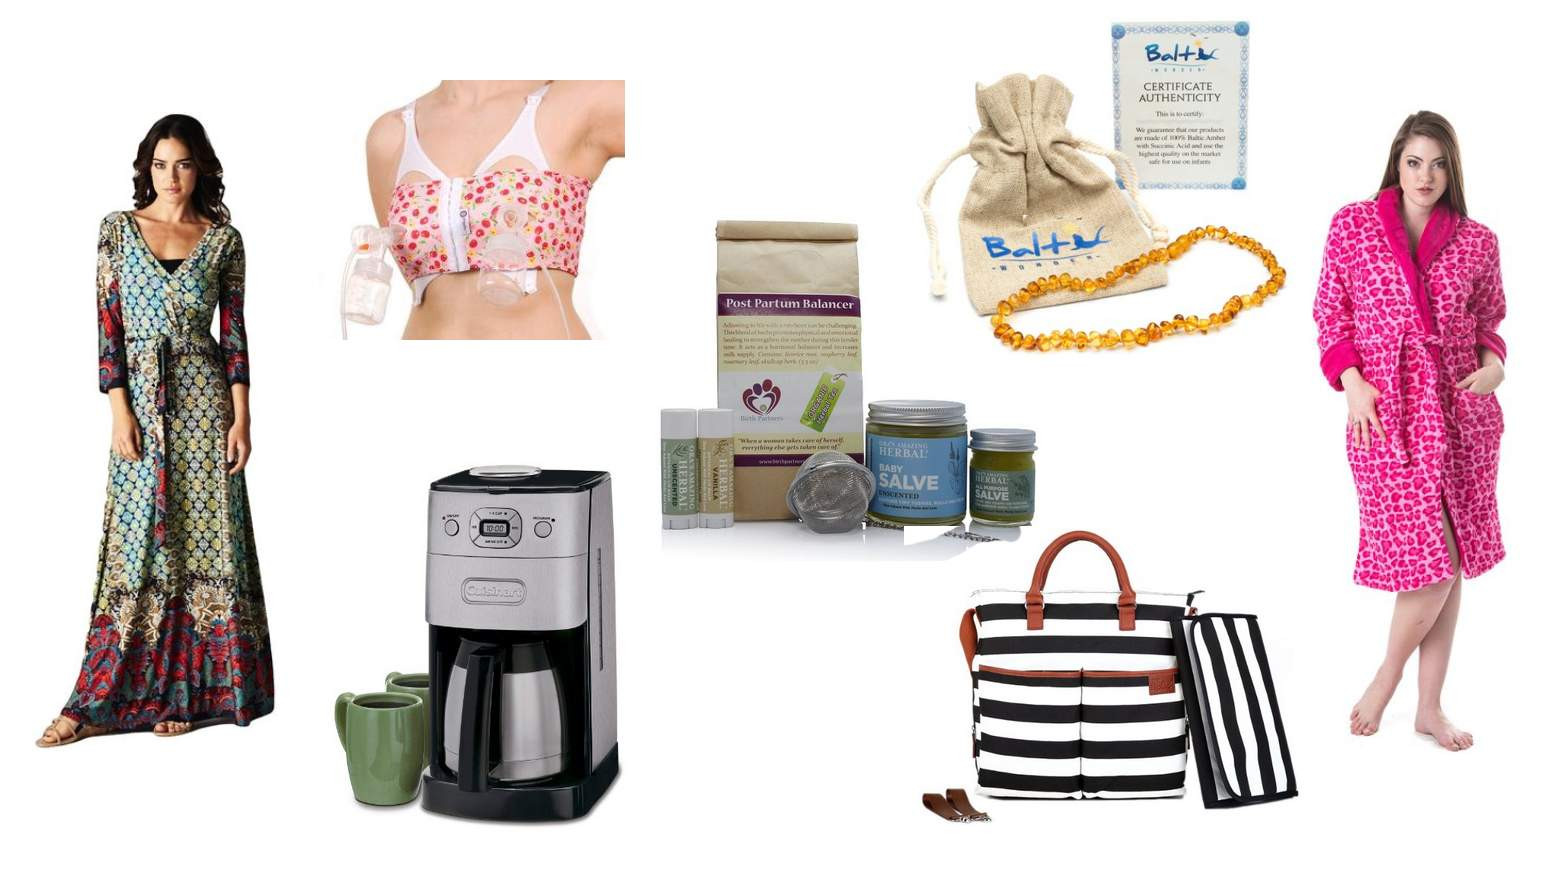 Qvc Mother's Day Gifts
 Top 10 Best Gifts for New Moms